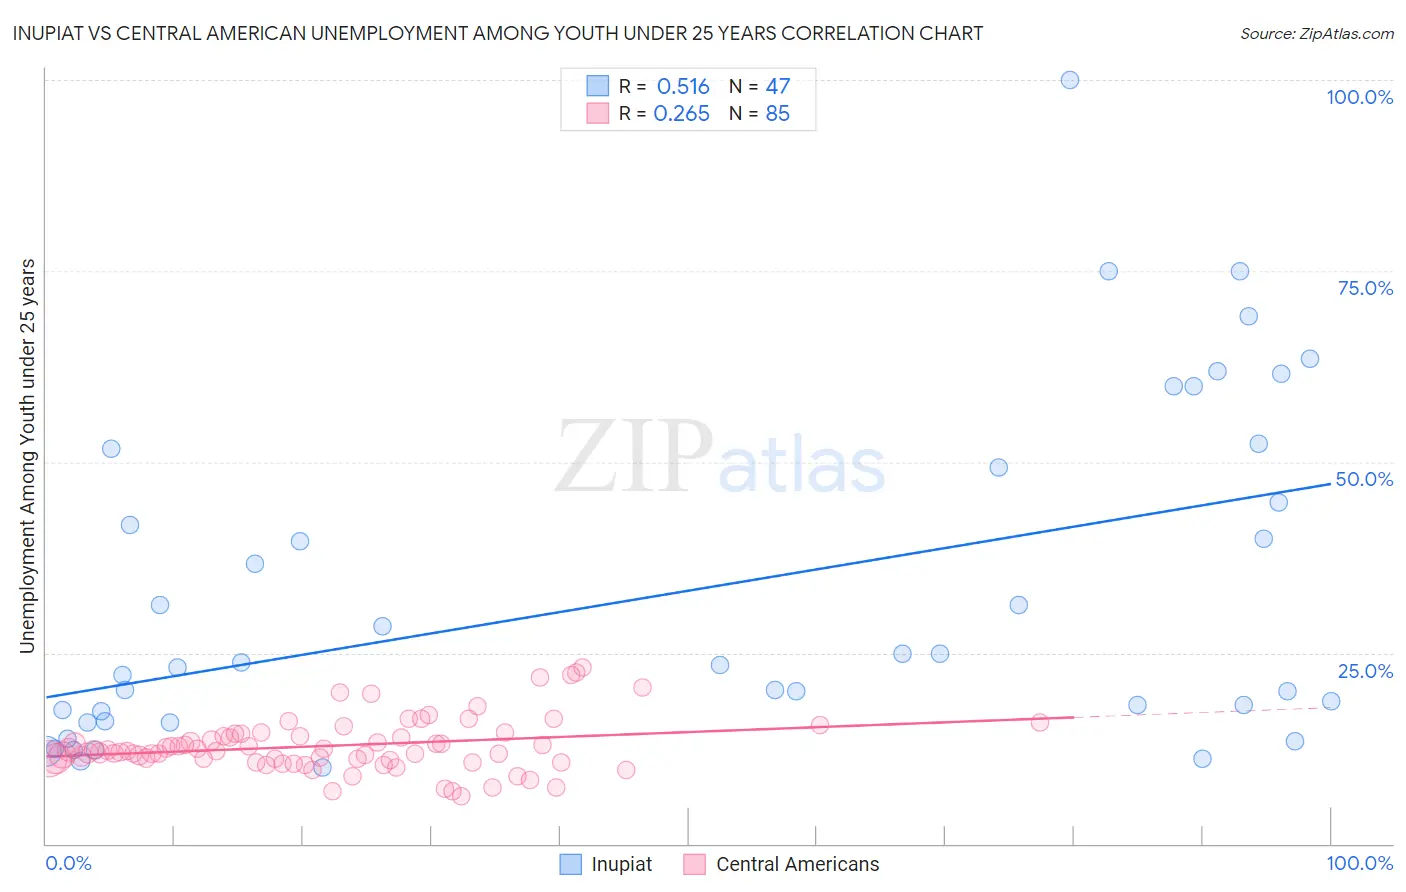 Inupiat vs Central American Unemployment Among Youth under 25 years